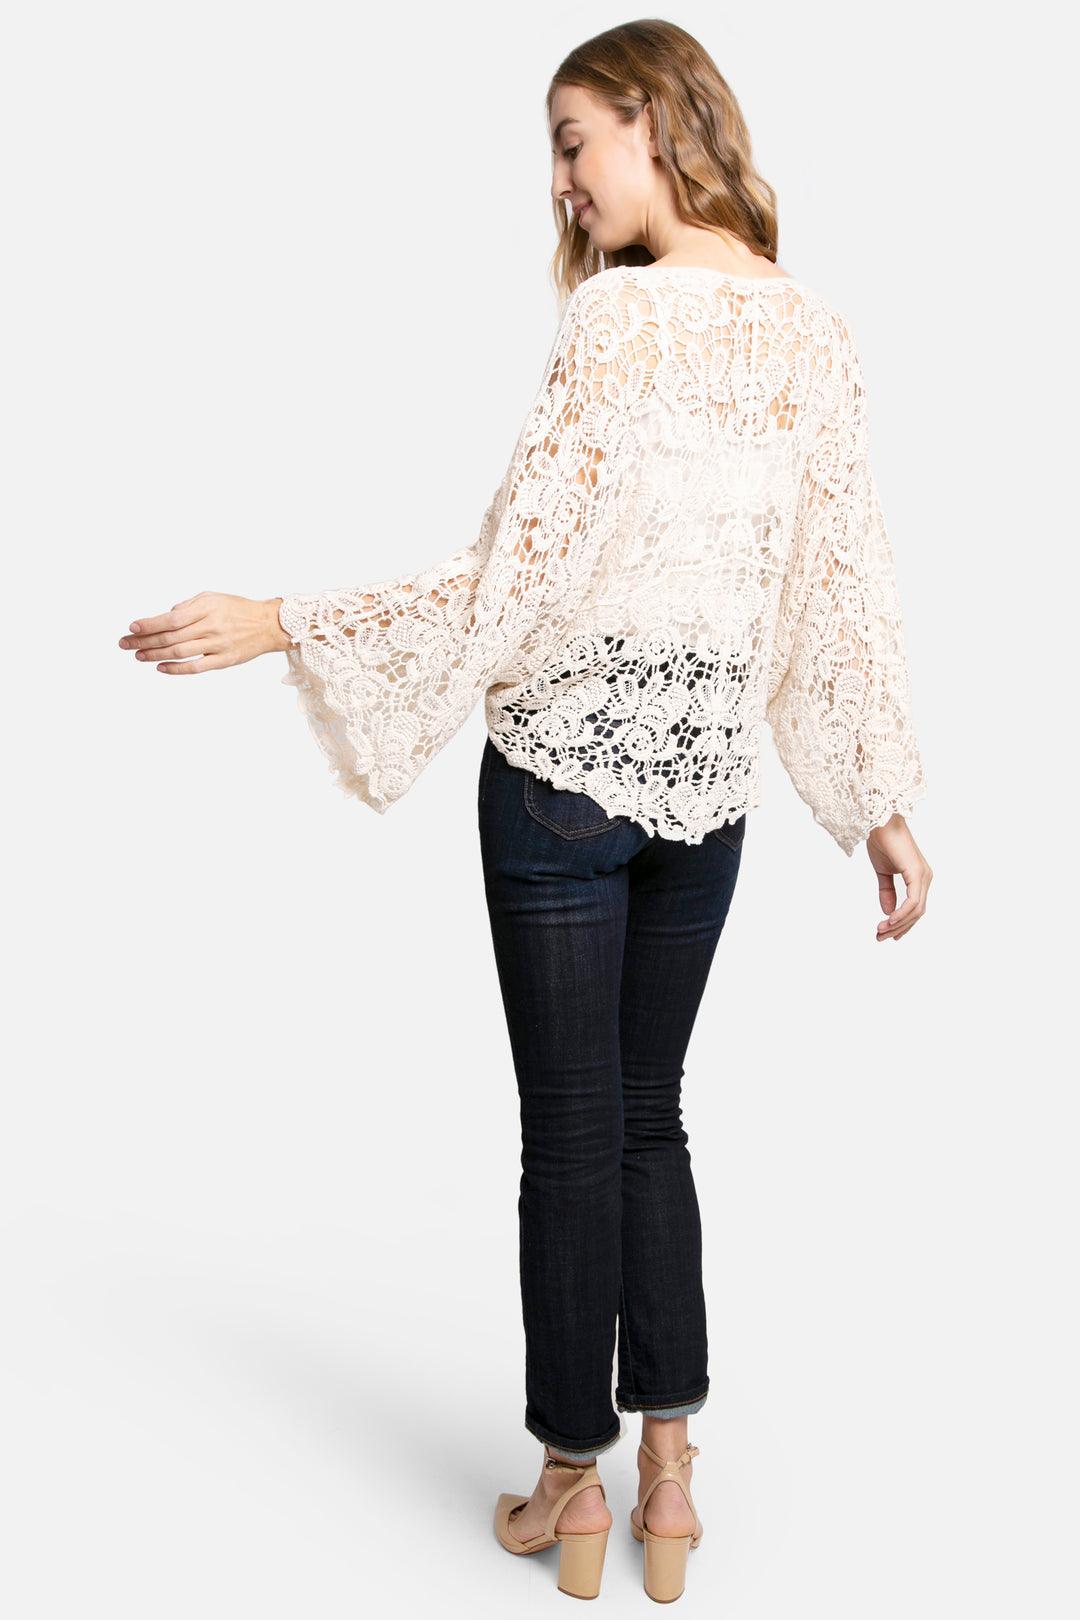 CROCHET SHAWL-IVORY - Kingfisher Road - Online Boutique